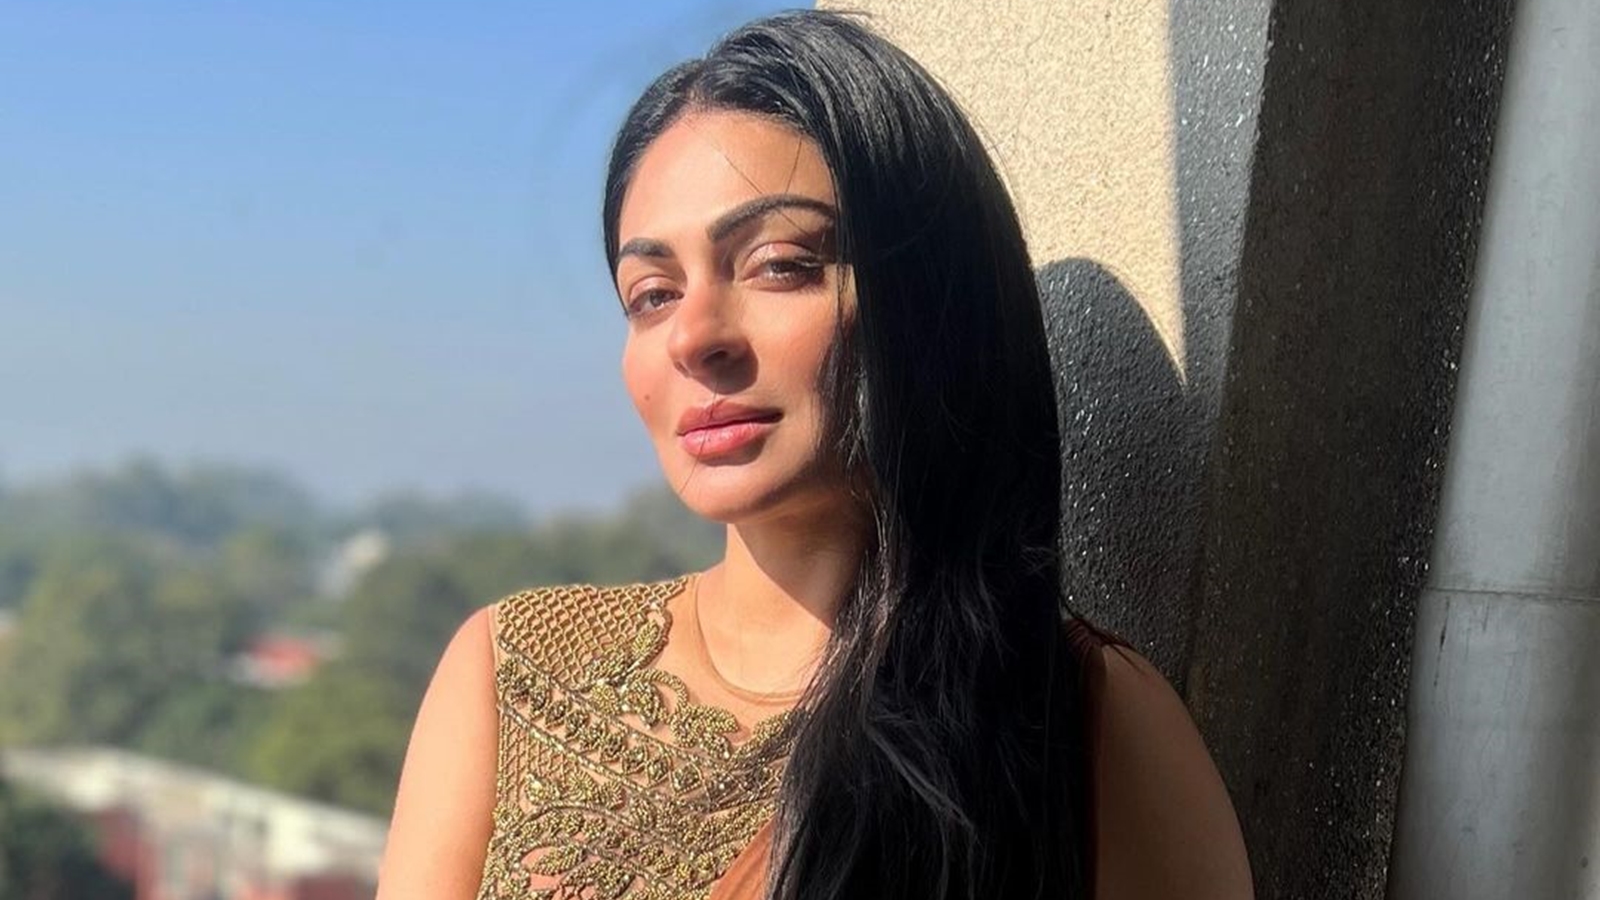 android, neeru bajwa breaks down as she recalls dad working at a gas station despite being a doctor, mom working as housekeeper during pregnancy